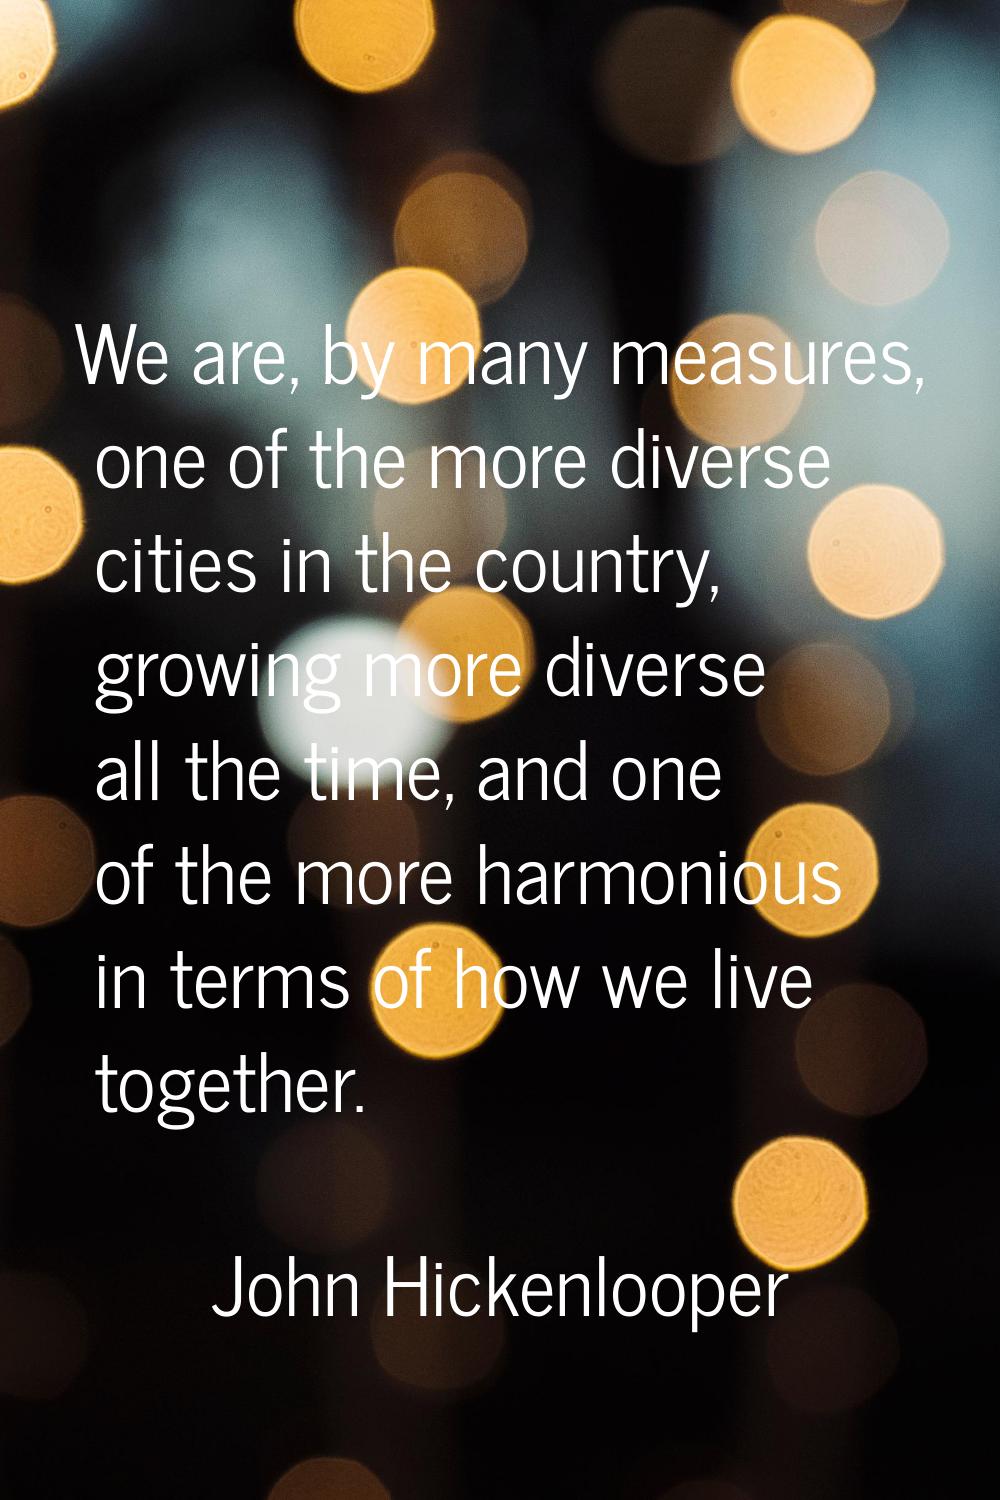 We are, by many measures, one of the more diverse cities in the country, growing more diverse all t